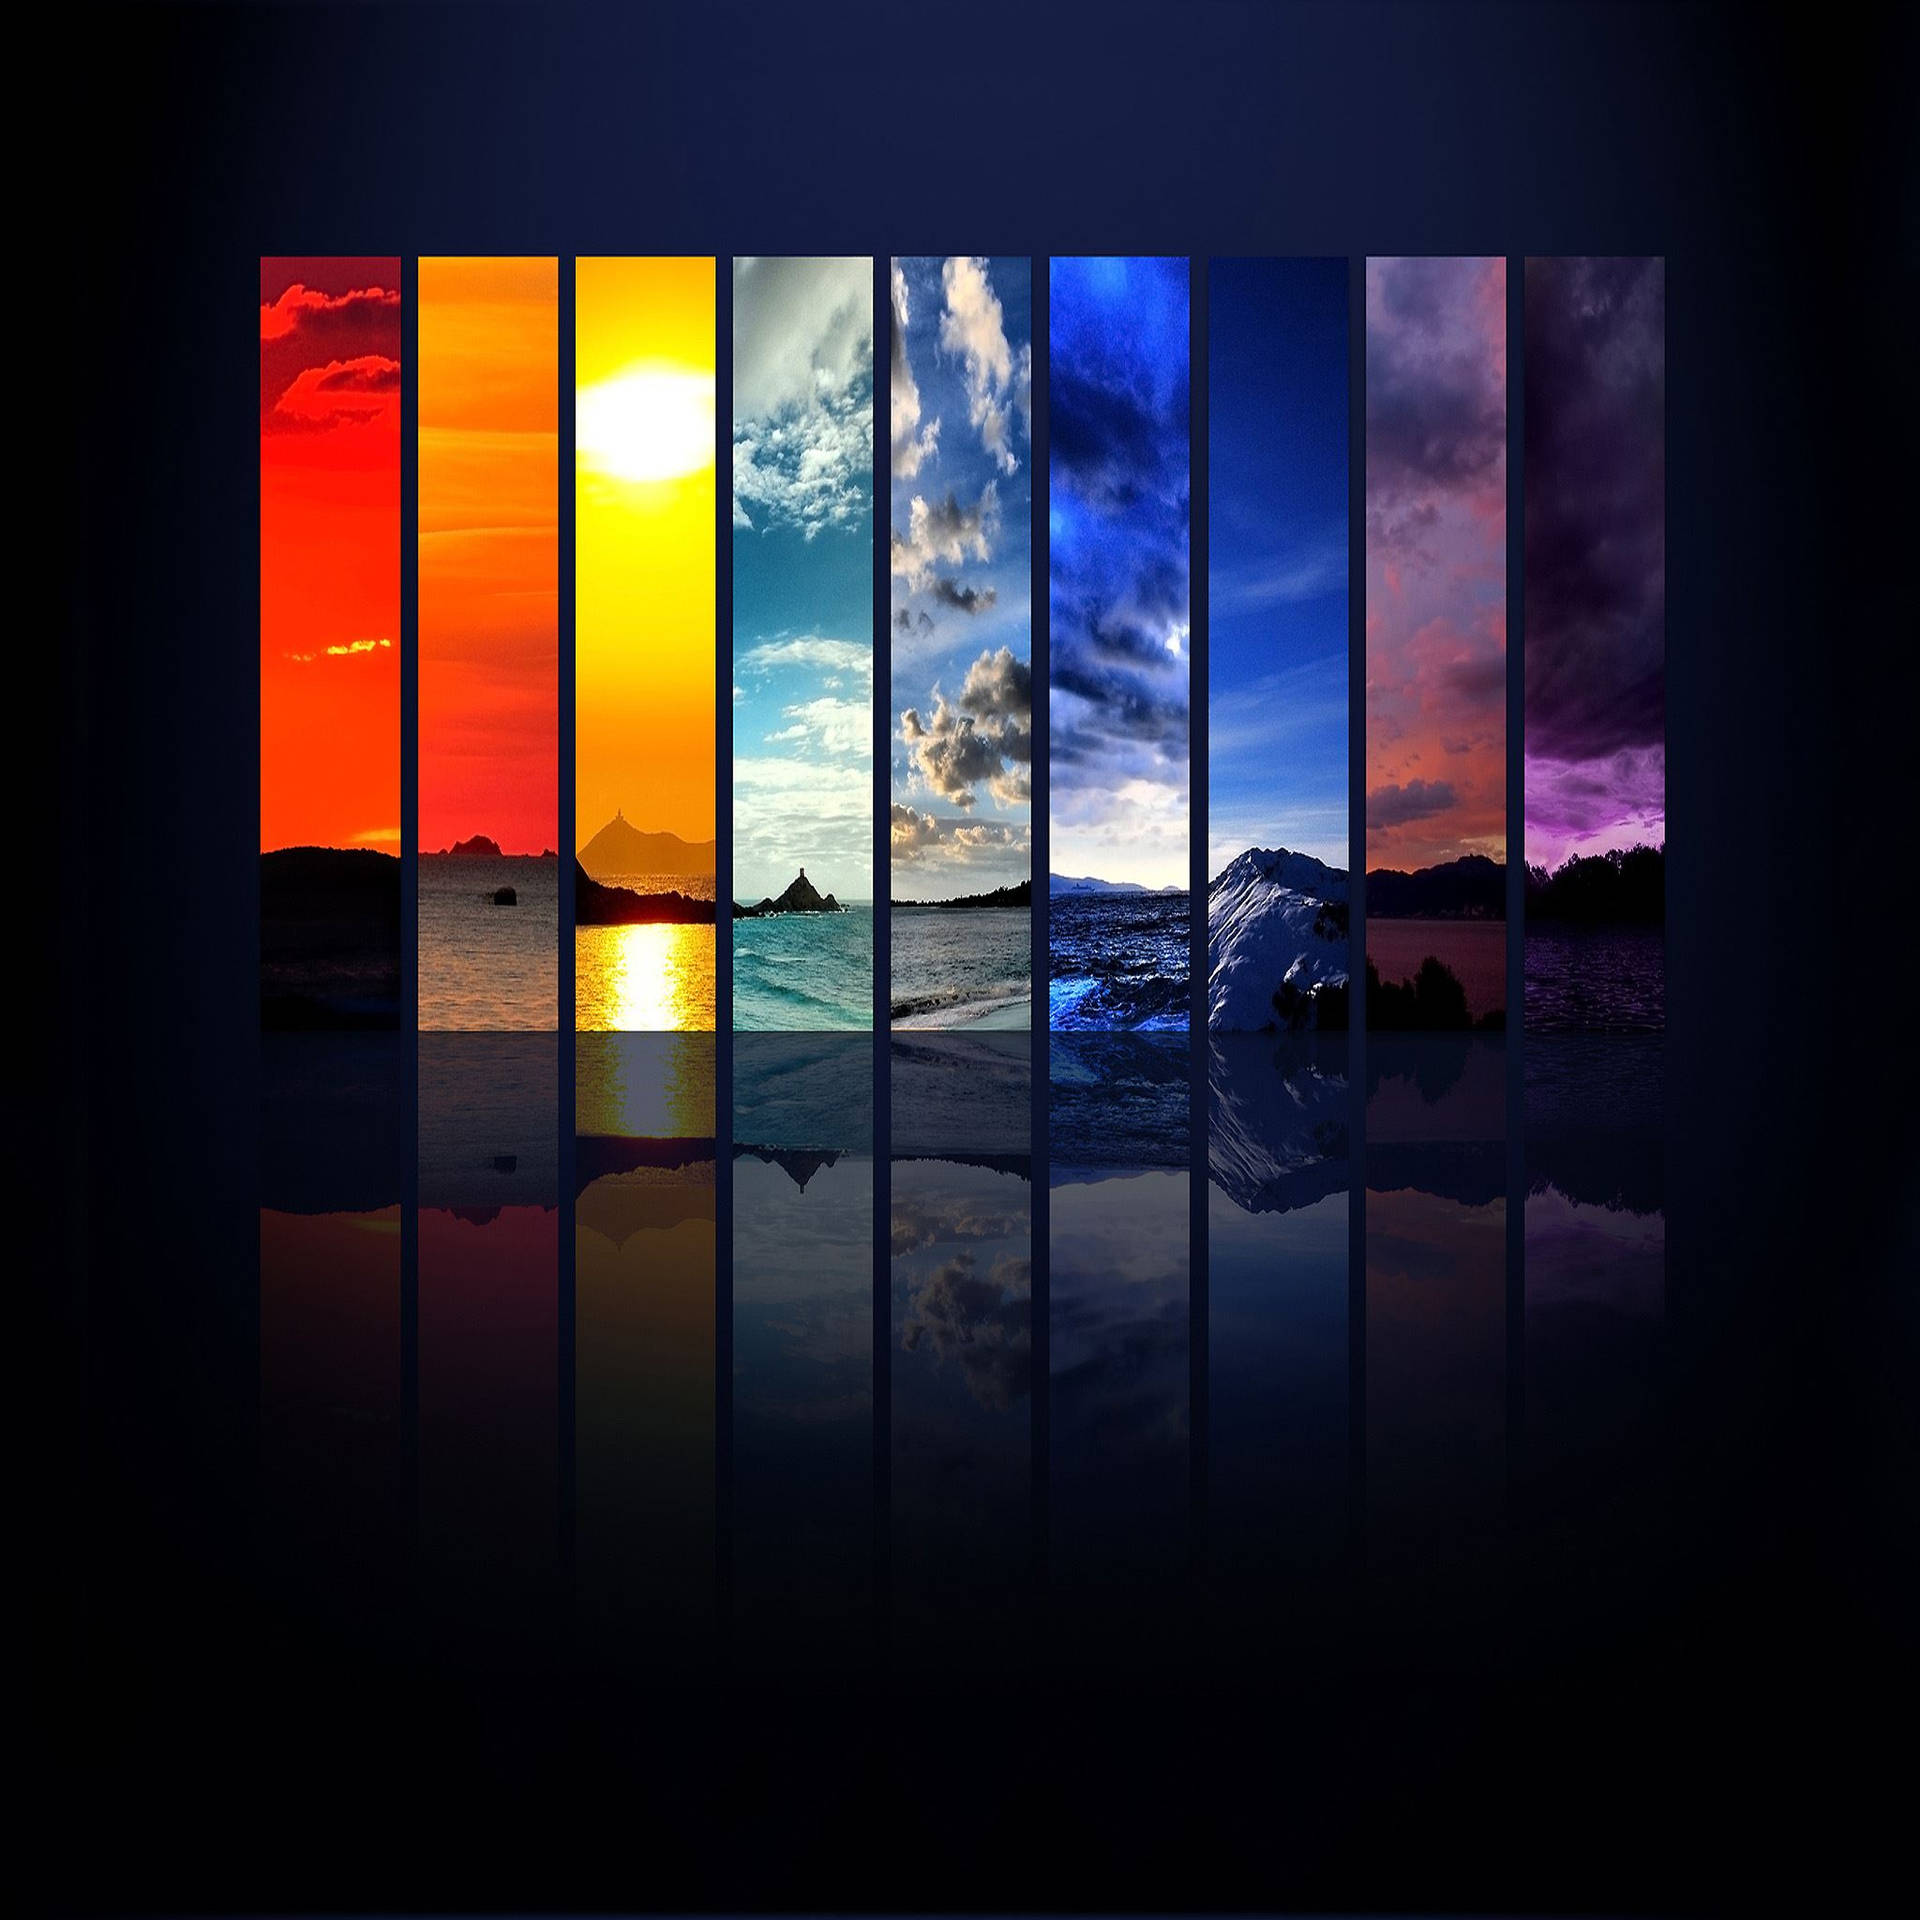 Rainbow Aesthetic 2048X2048 Wallpaper and Background Image